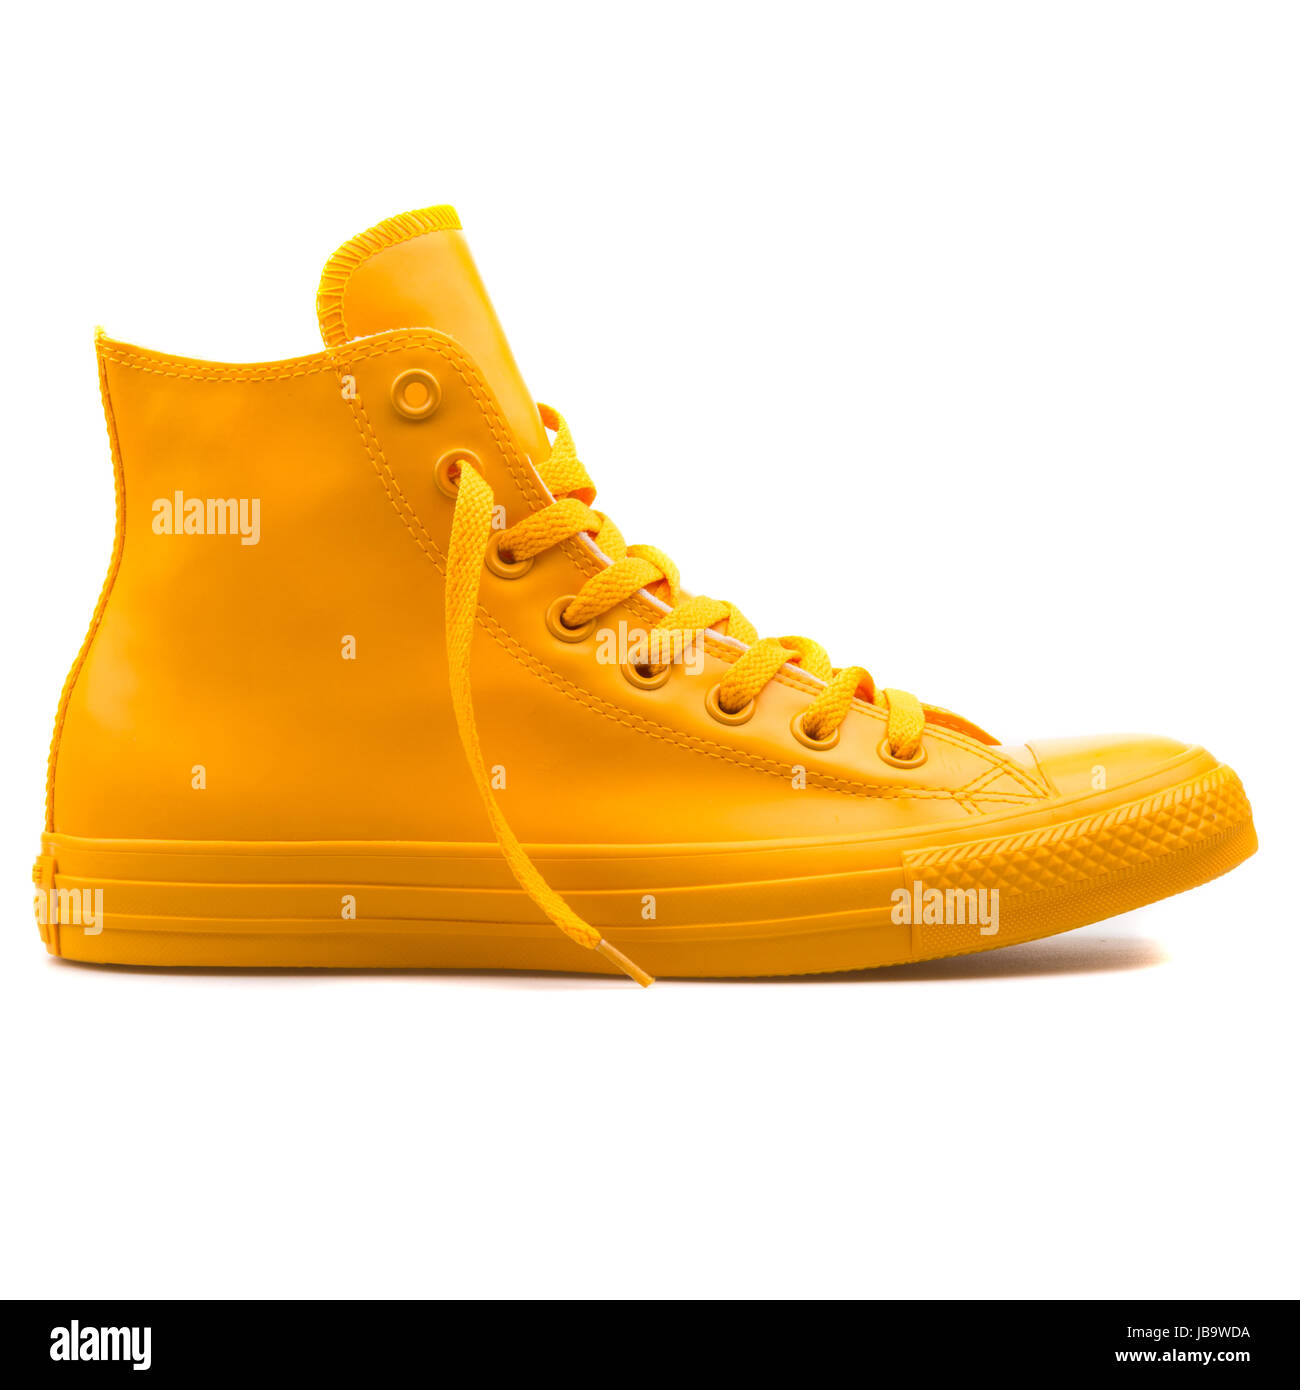 converse all yellow